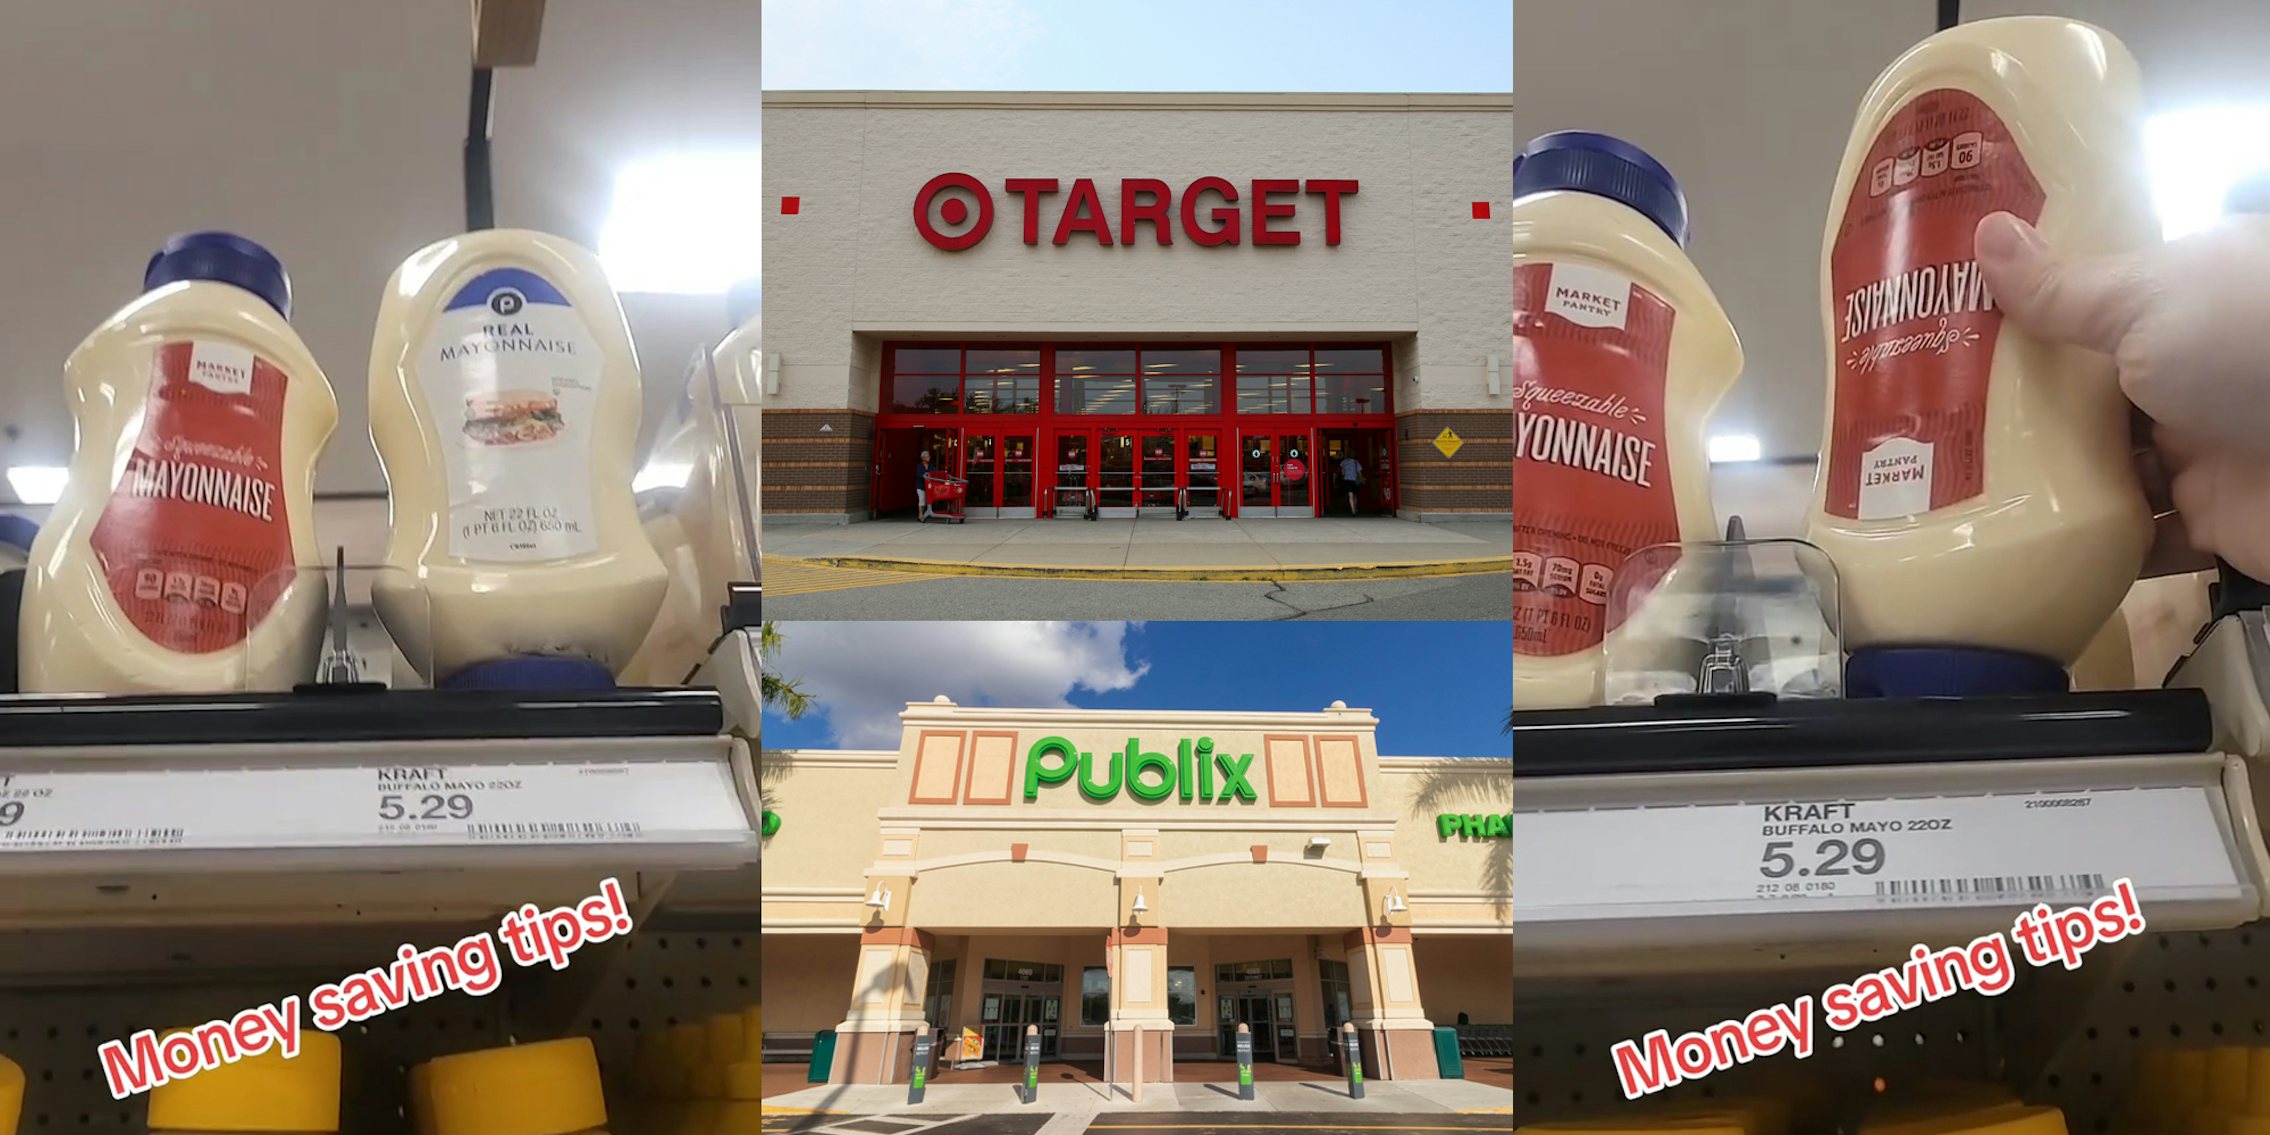 mayonnaise on store shelf with Target and Publix labels with caption 'Money saving tips!' (l) Target store with sign above Publix store with sign (c) mayonnaise on store shelf with Target labels wiith caption 'Money saving tips!' (r)